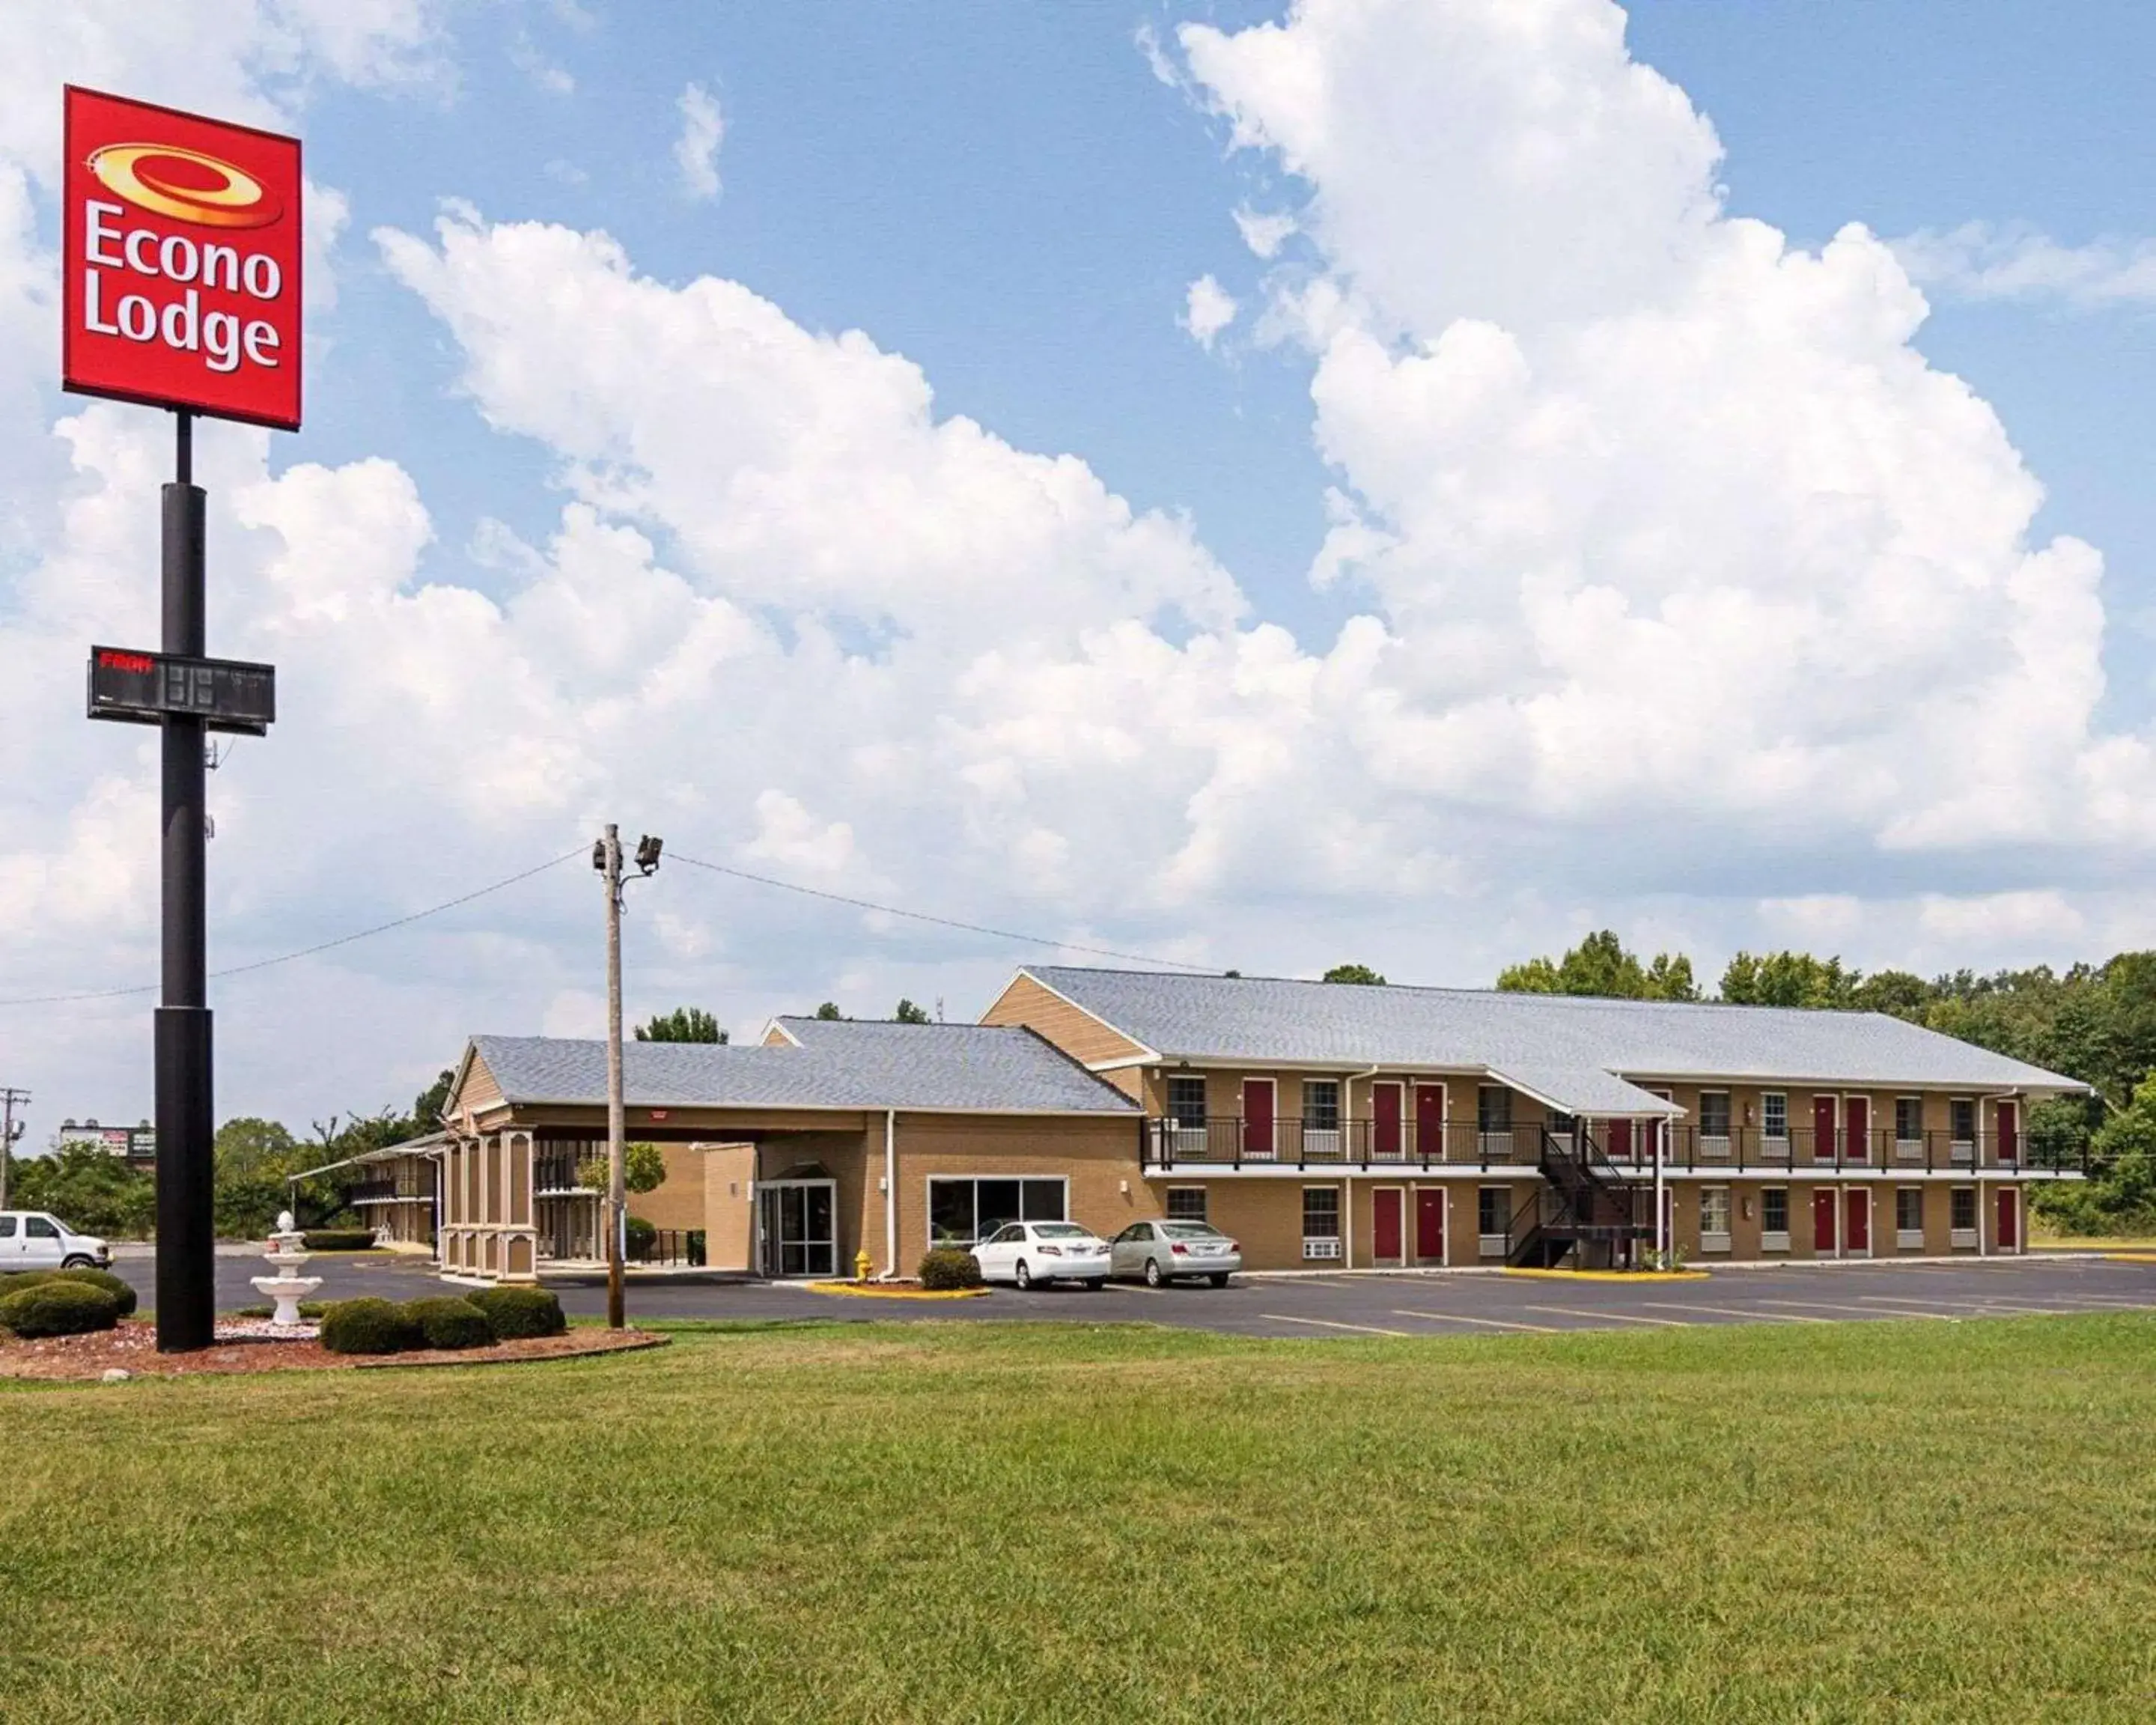 Property building in Econo Lodge Pine Bluff